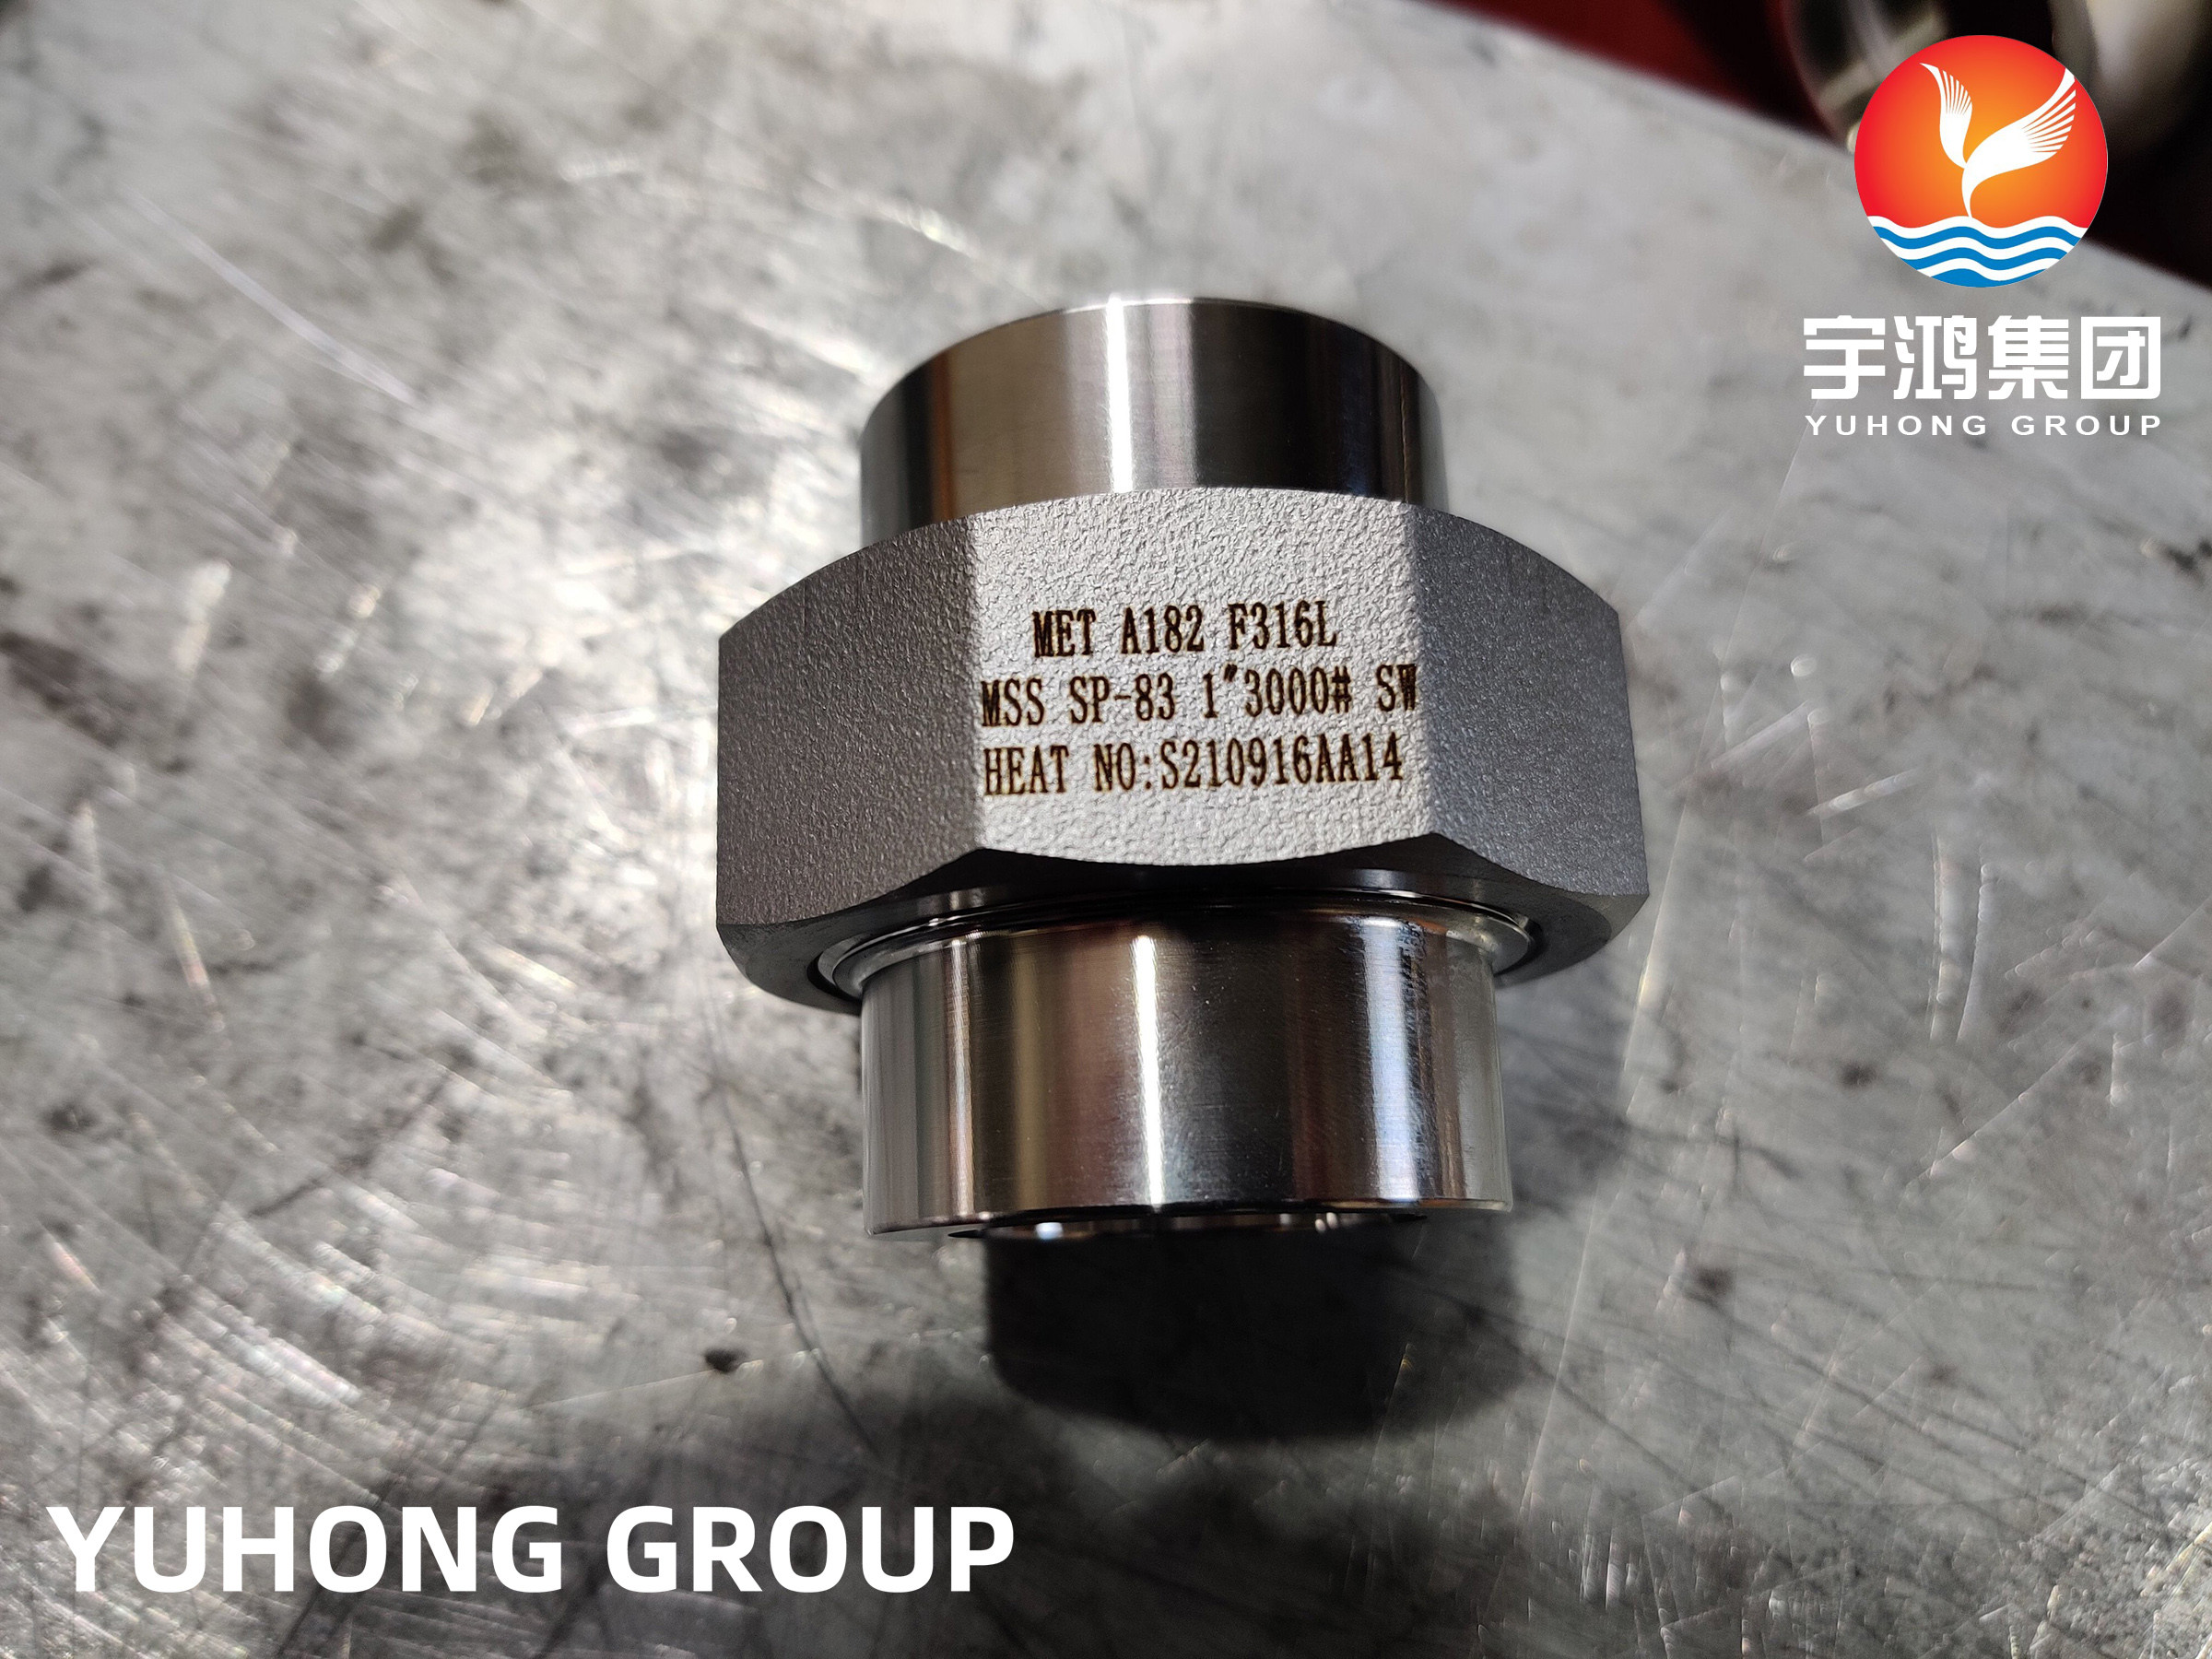 China ASTM A182 F316L M33 SP-83 B16.11 B1.20.1 High Pressure SW Stainless Steel Forged Thread NPT Union Forged Pipe Fitting wholesale